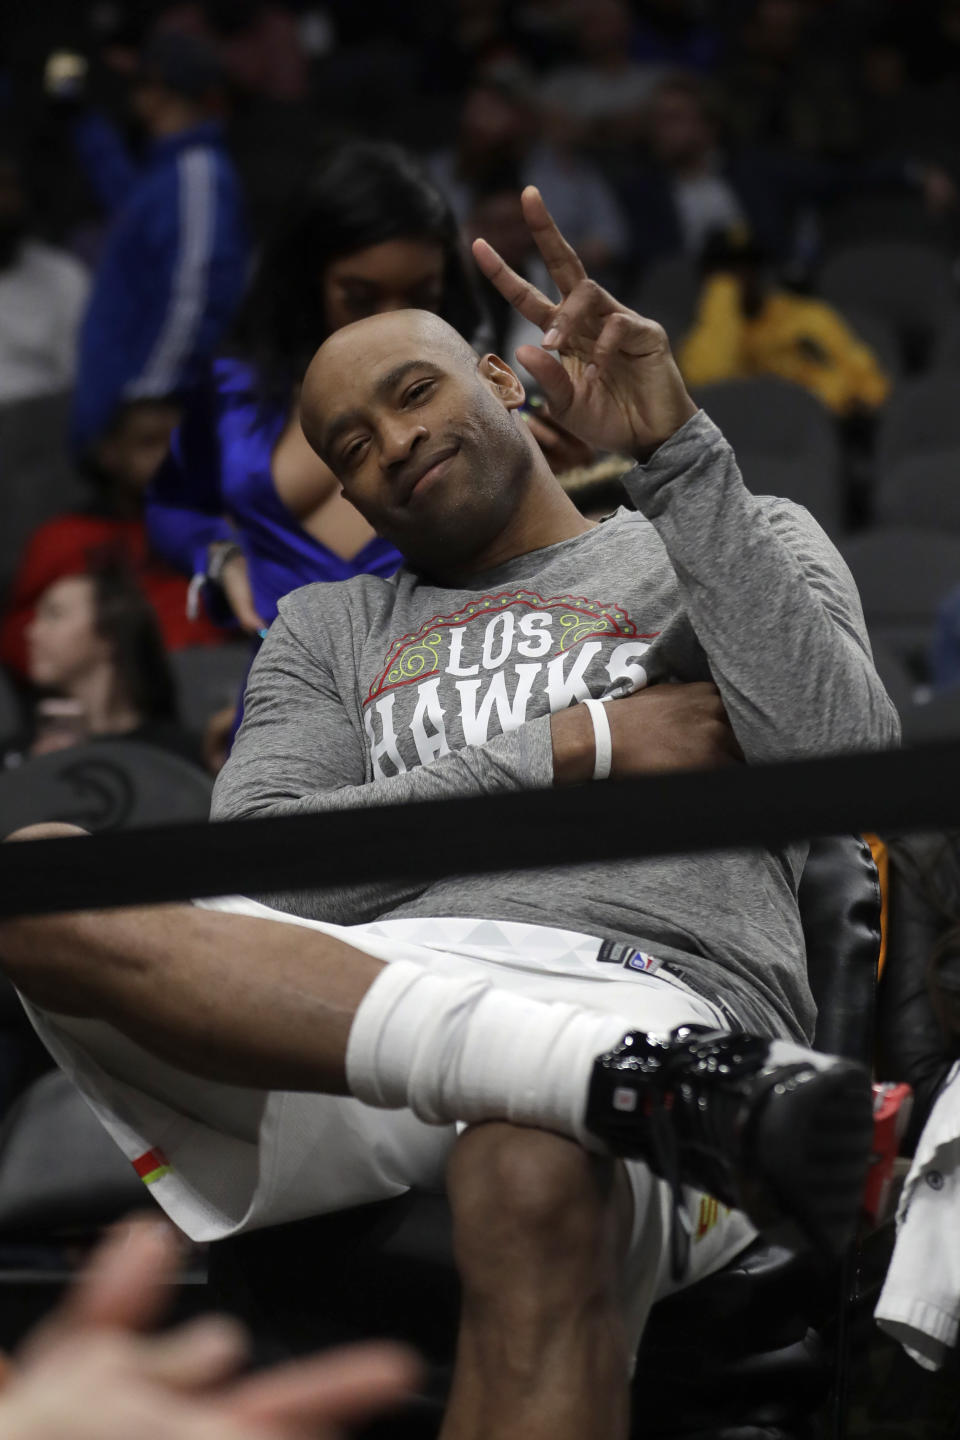 Atlanta Hawks guard Vince Carter (15) sits on the bench in the final seconds of an NBA basketball game against the New York Knicks Wednesday, March 11, 2020, in Atlanta. (AP Photo/John Bazemore)